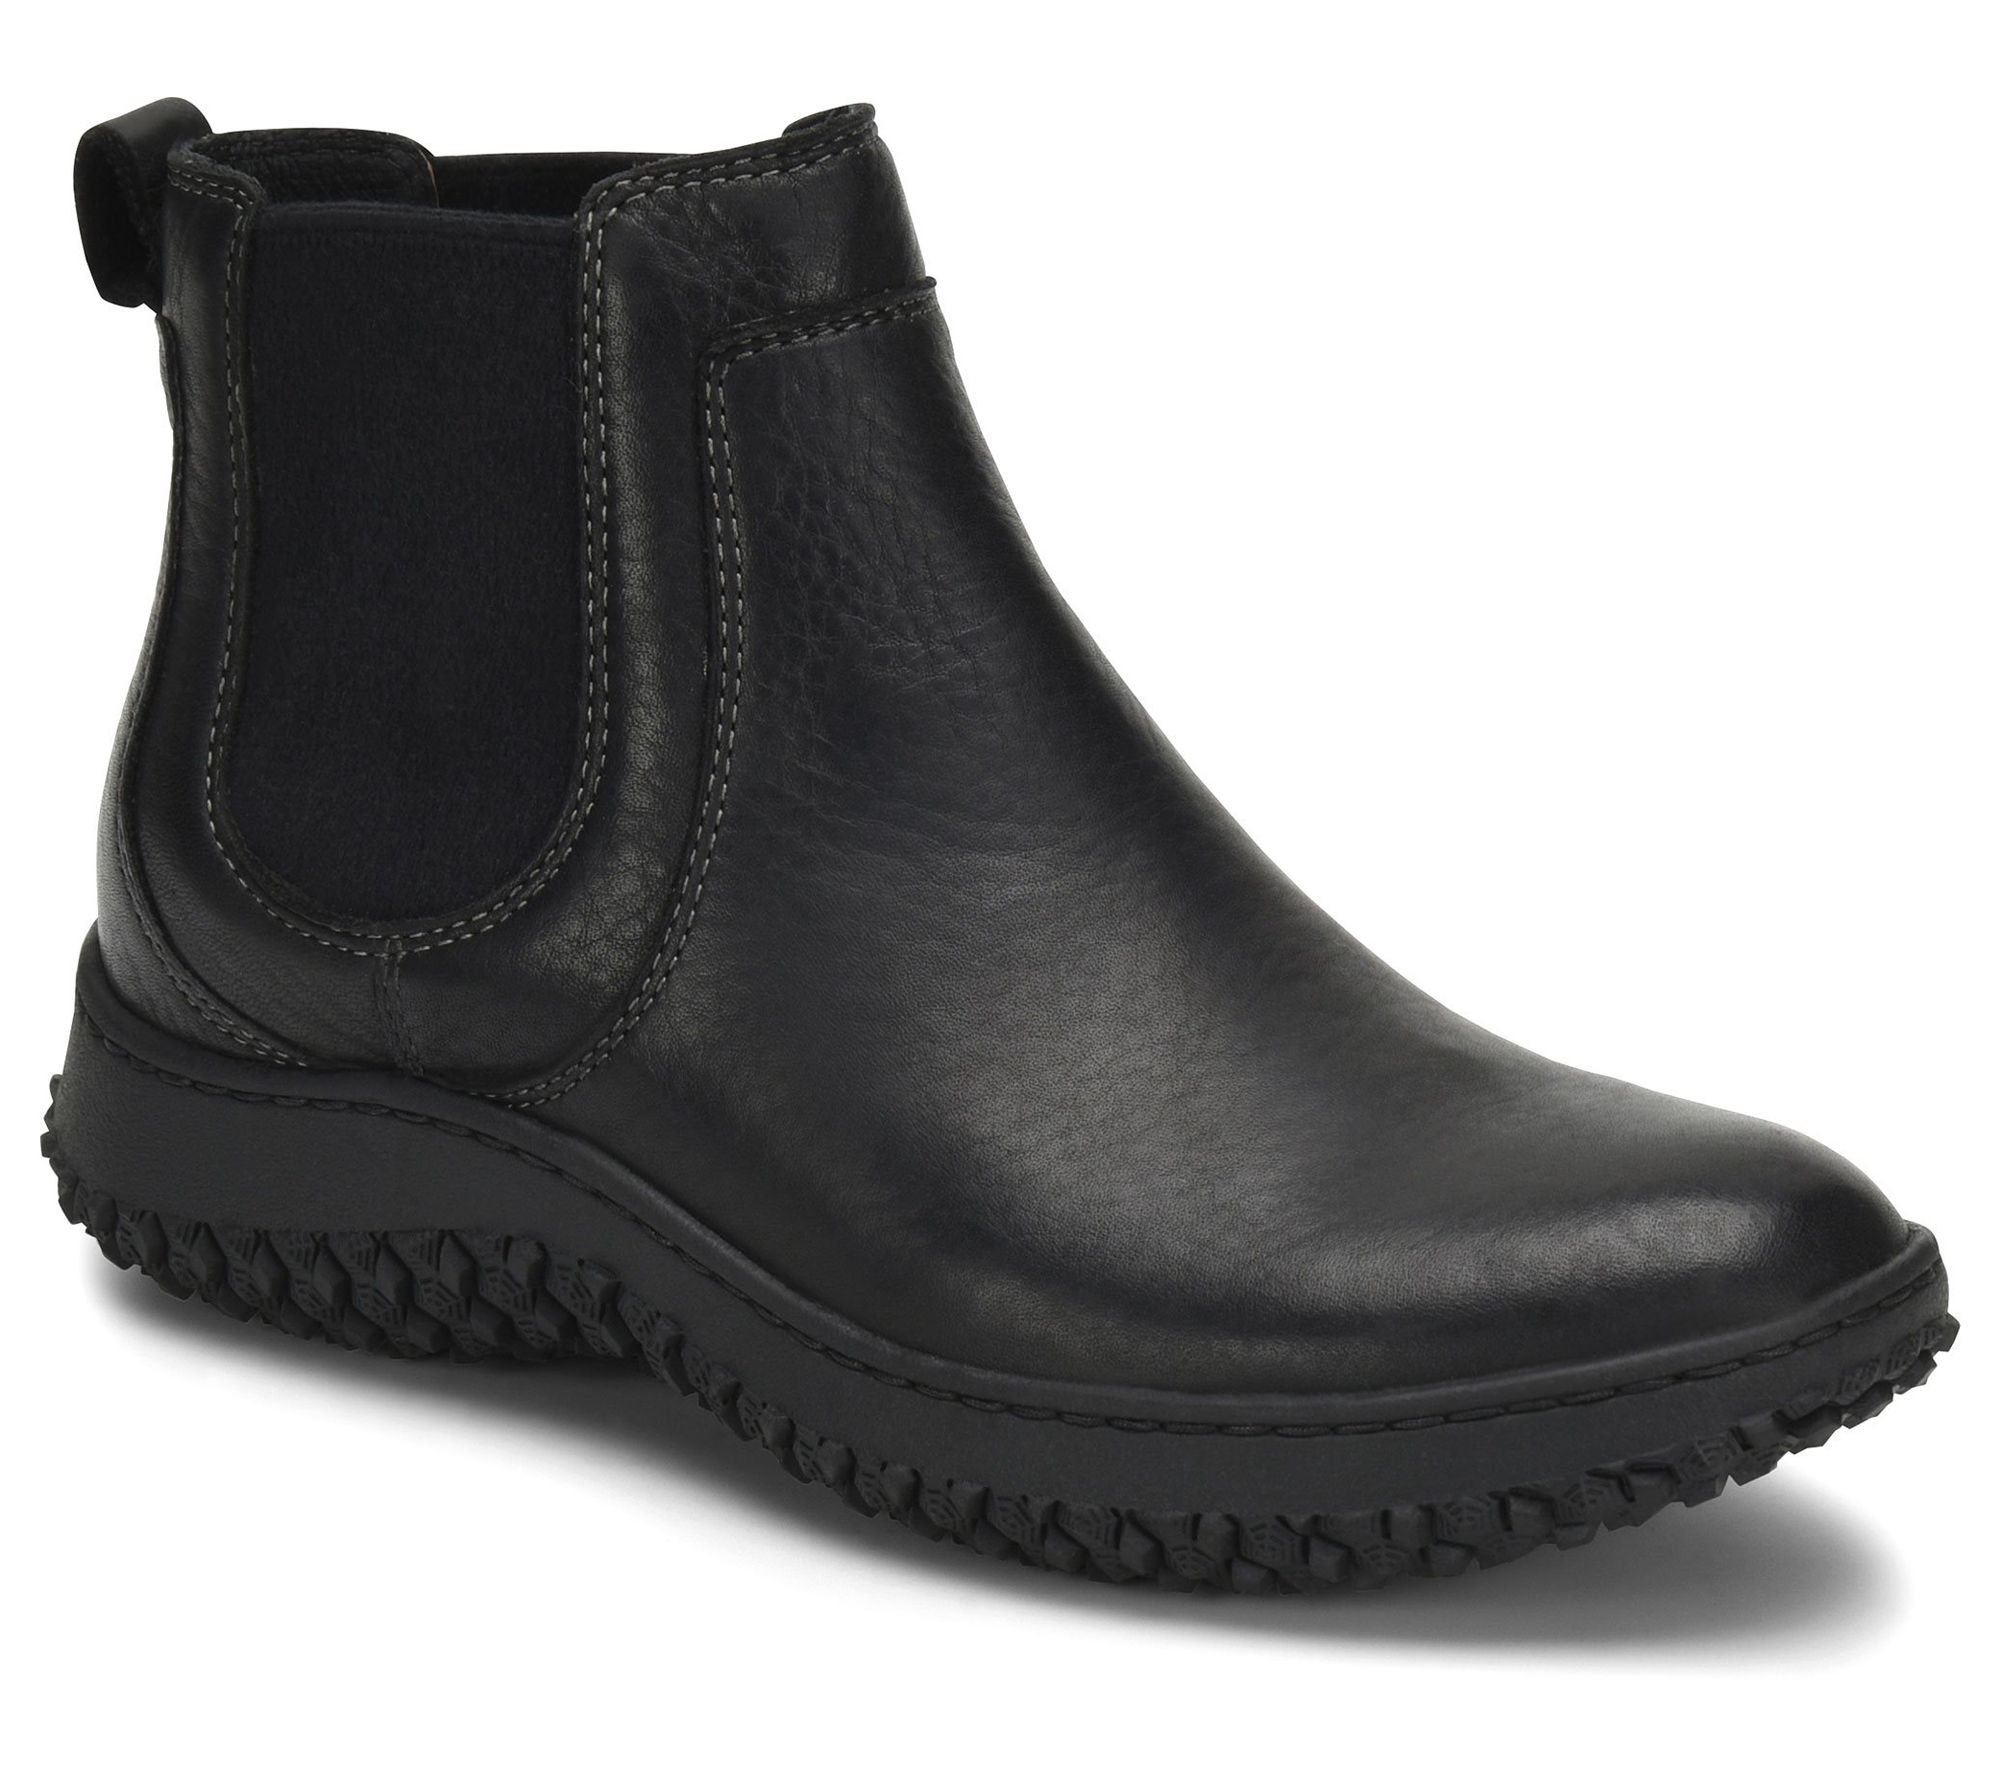 sofft chelsea boot